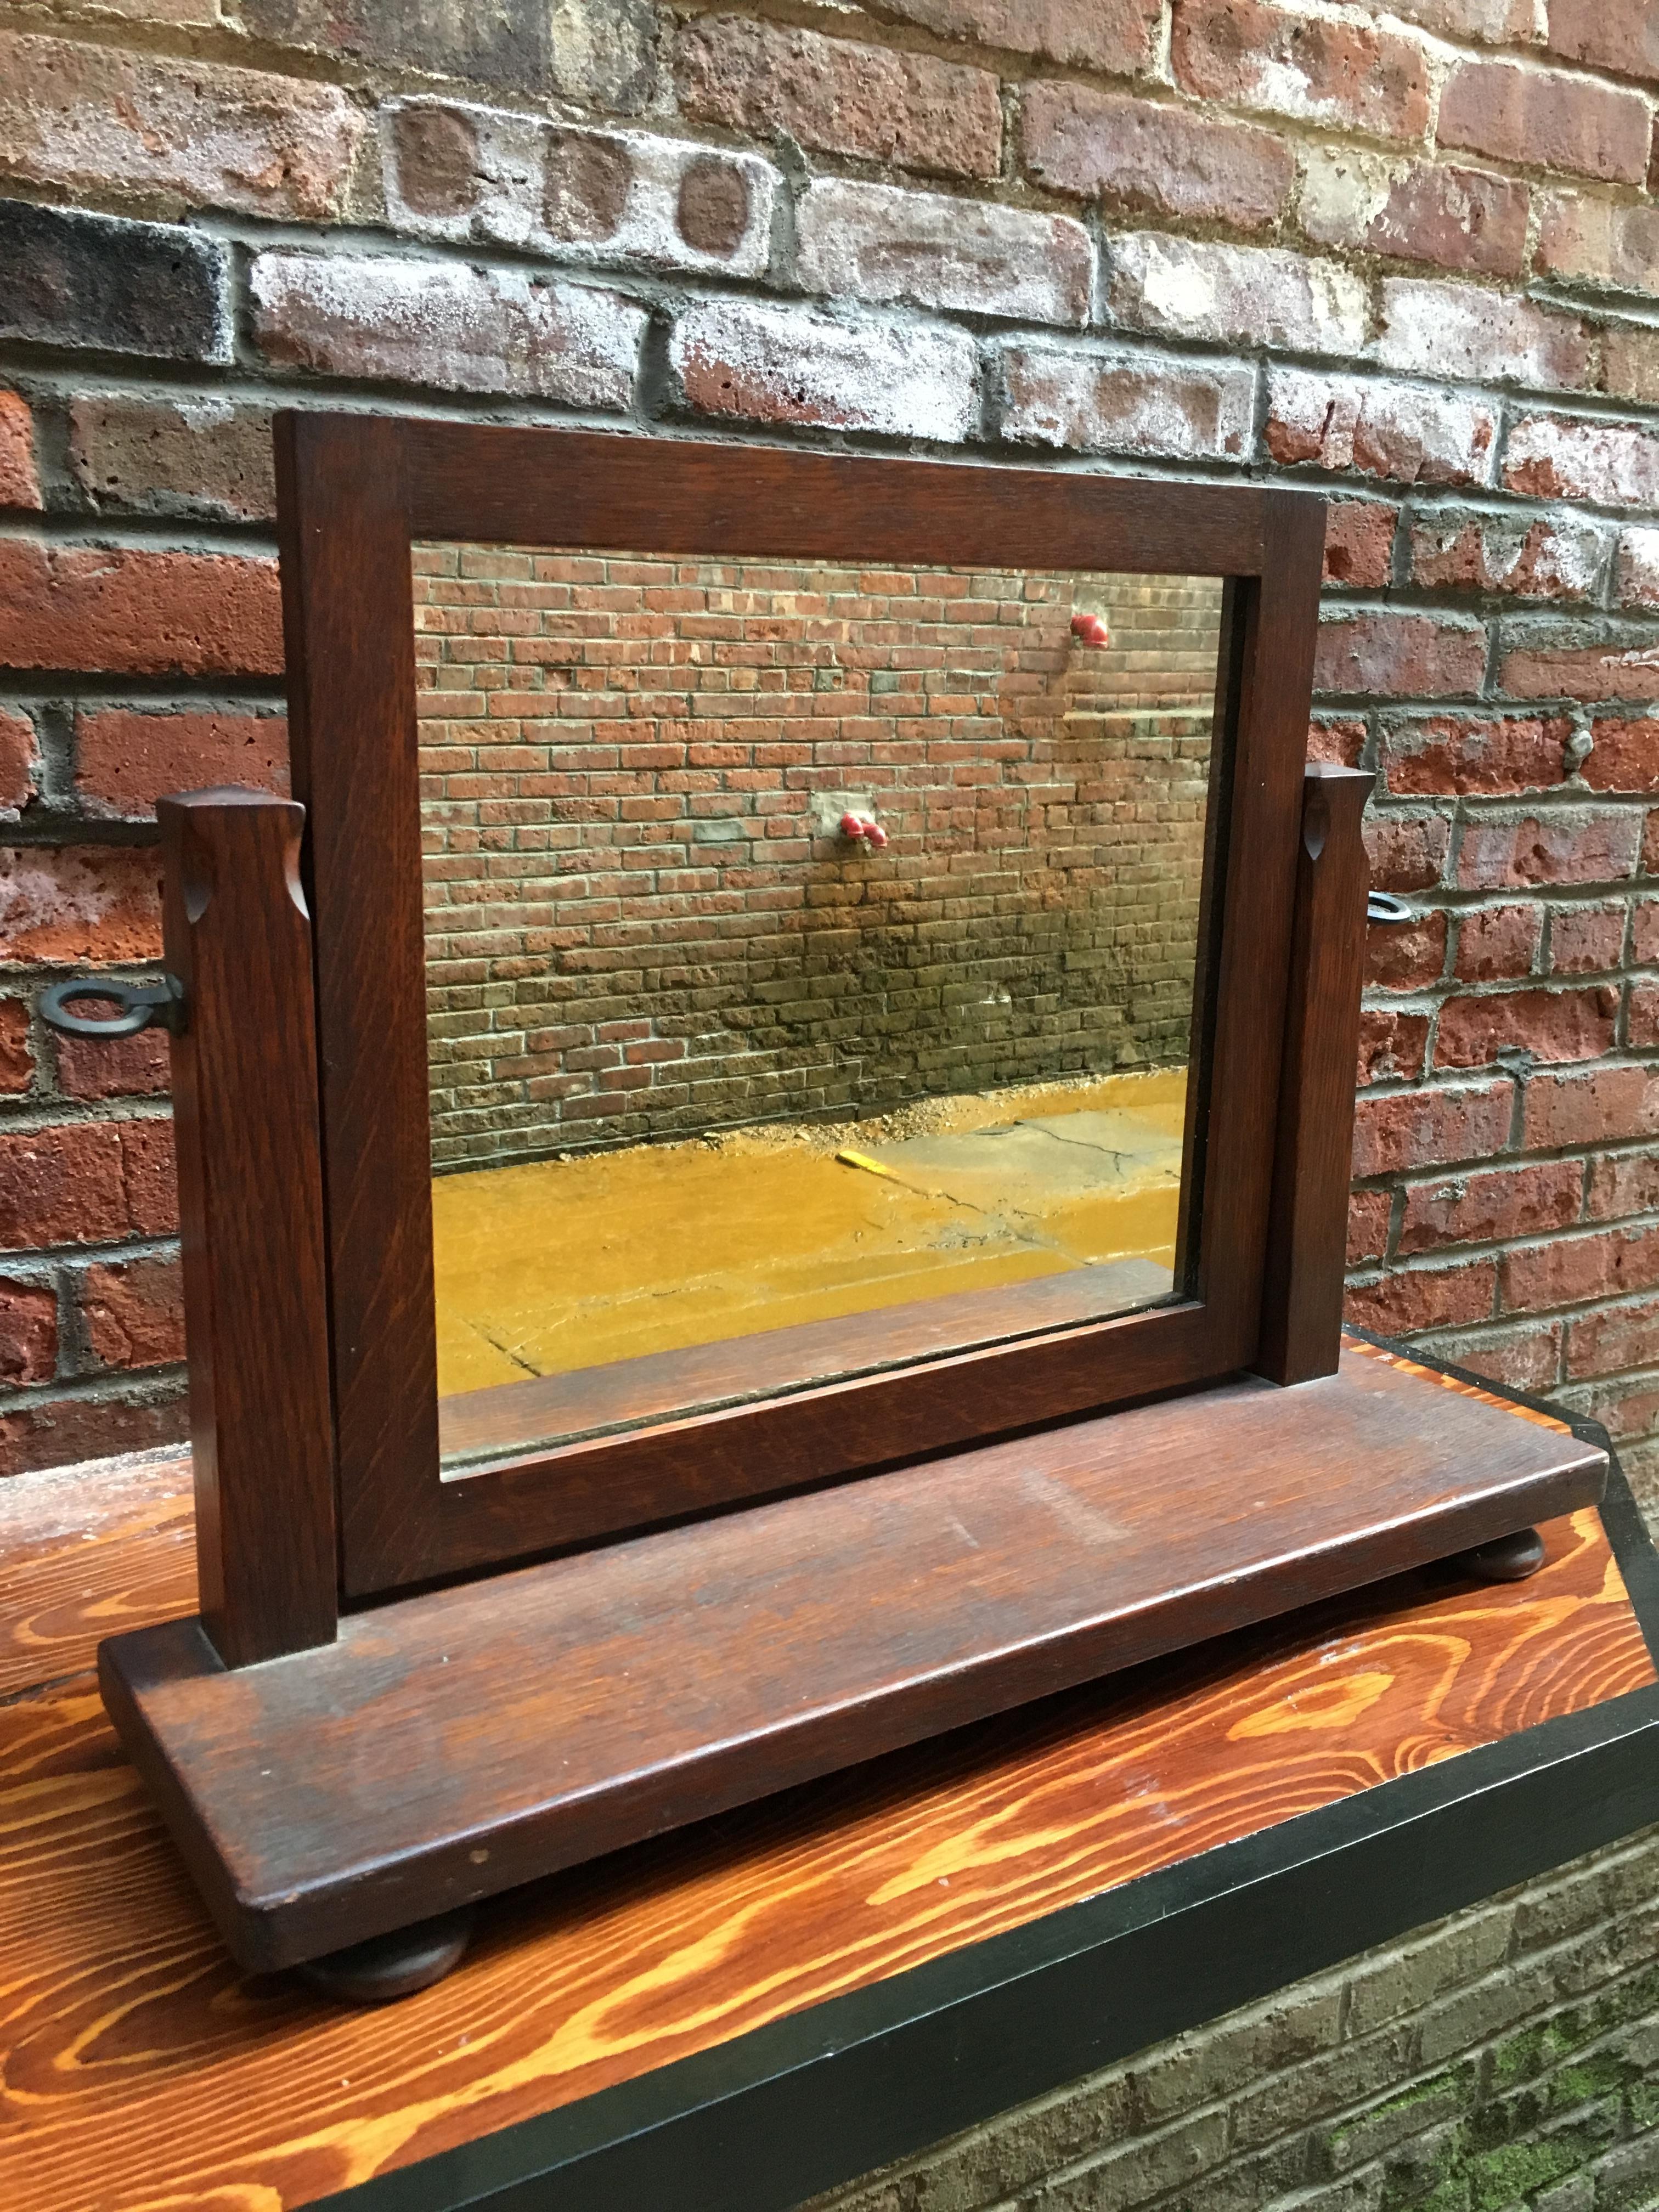 Constructed from solid American white quarter sawn oak. Adjustable mirror, carved posts resting on four bun feet. Old dark finish, circa early 20th century. Great for an overmantel, tabletop or dresser.

Measures: 6.75